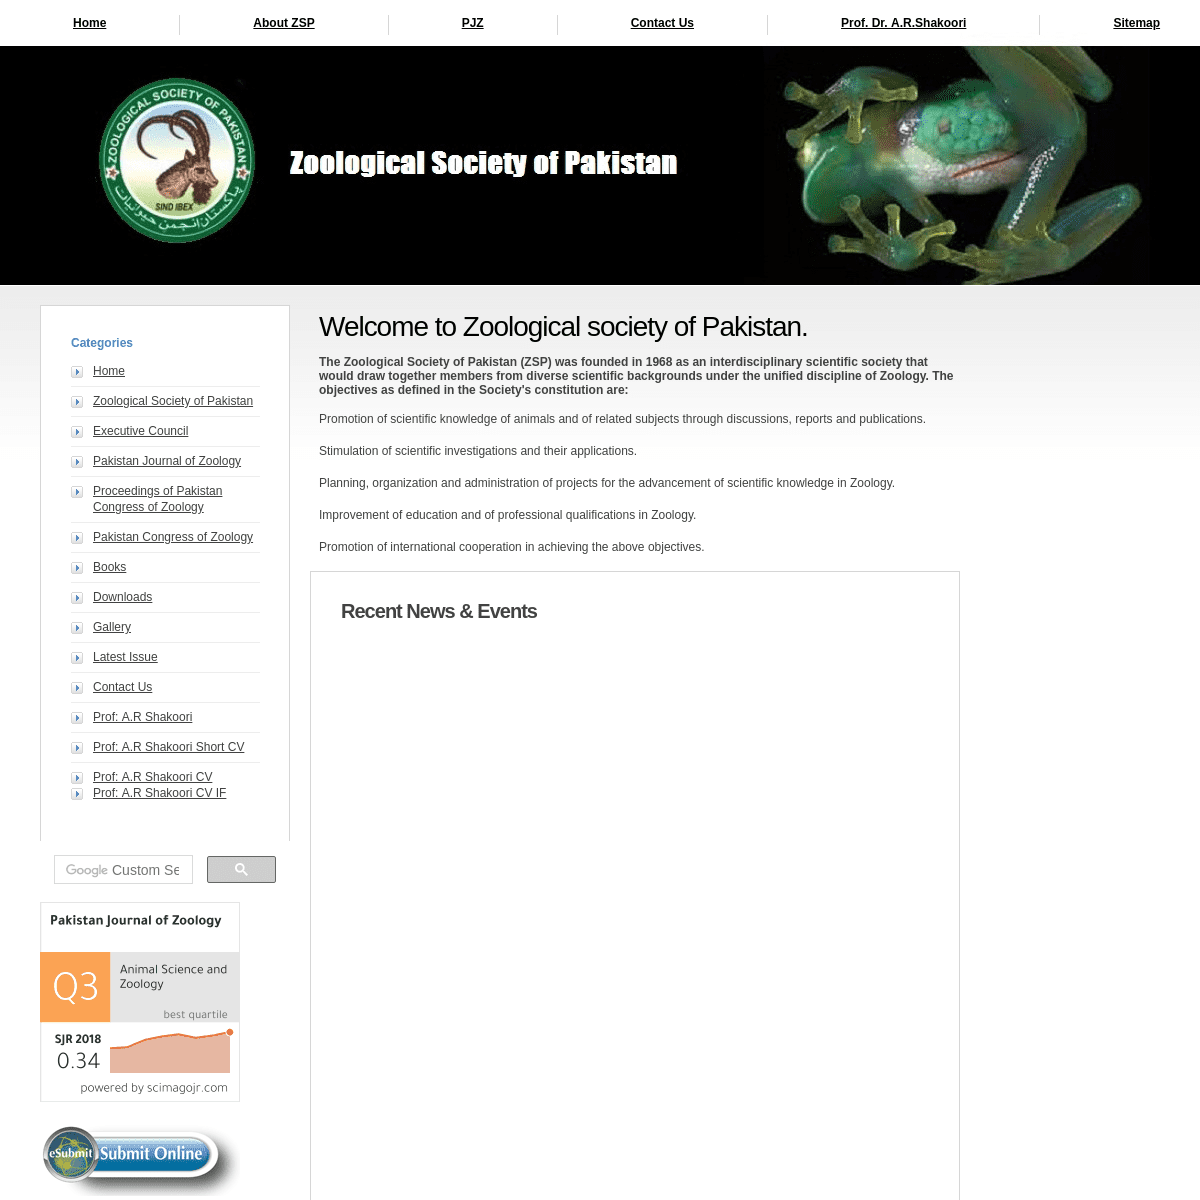 Home Page | Zoological Society Of Pakistan